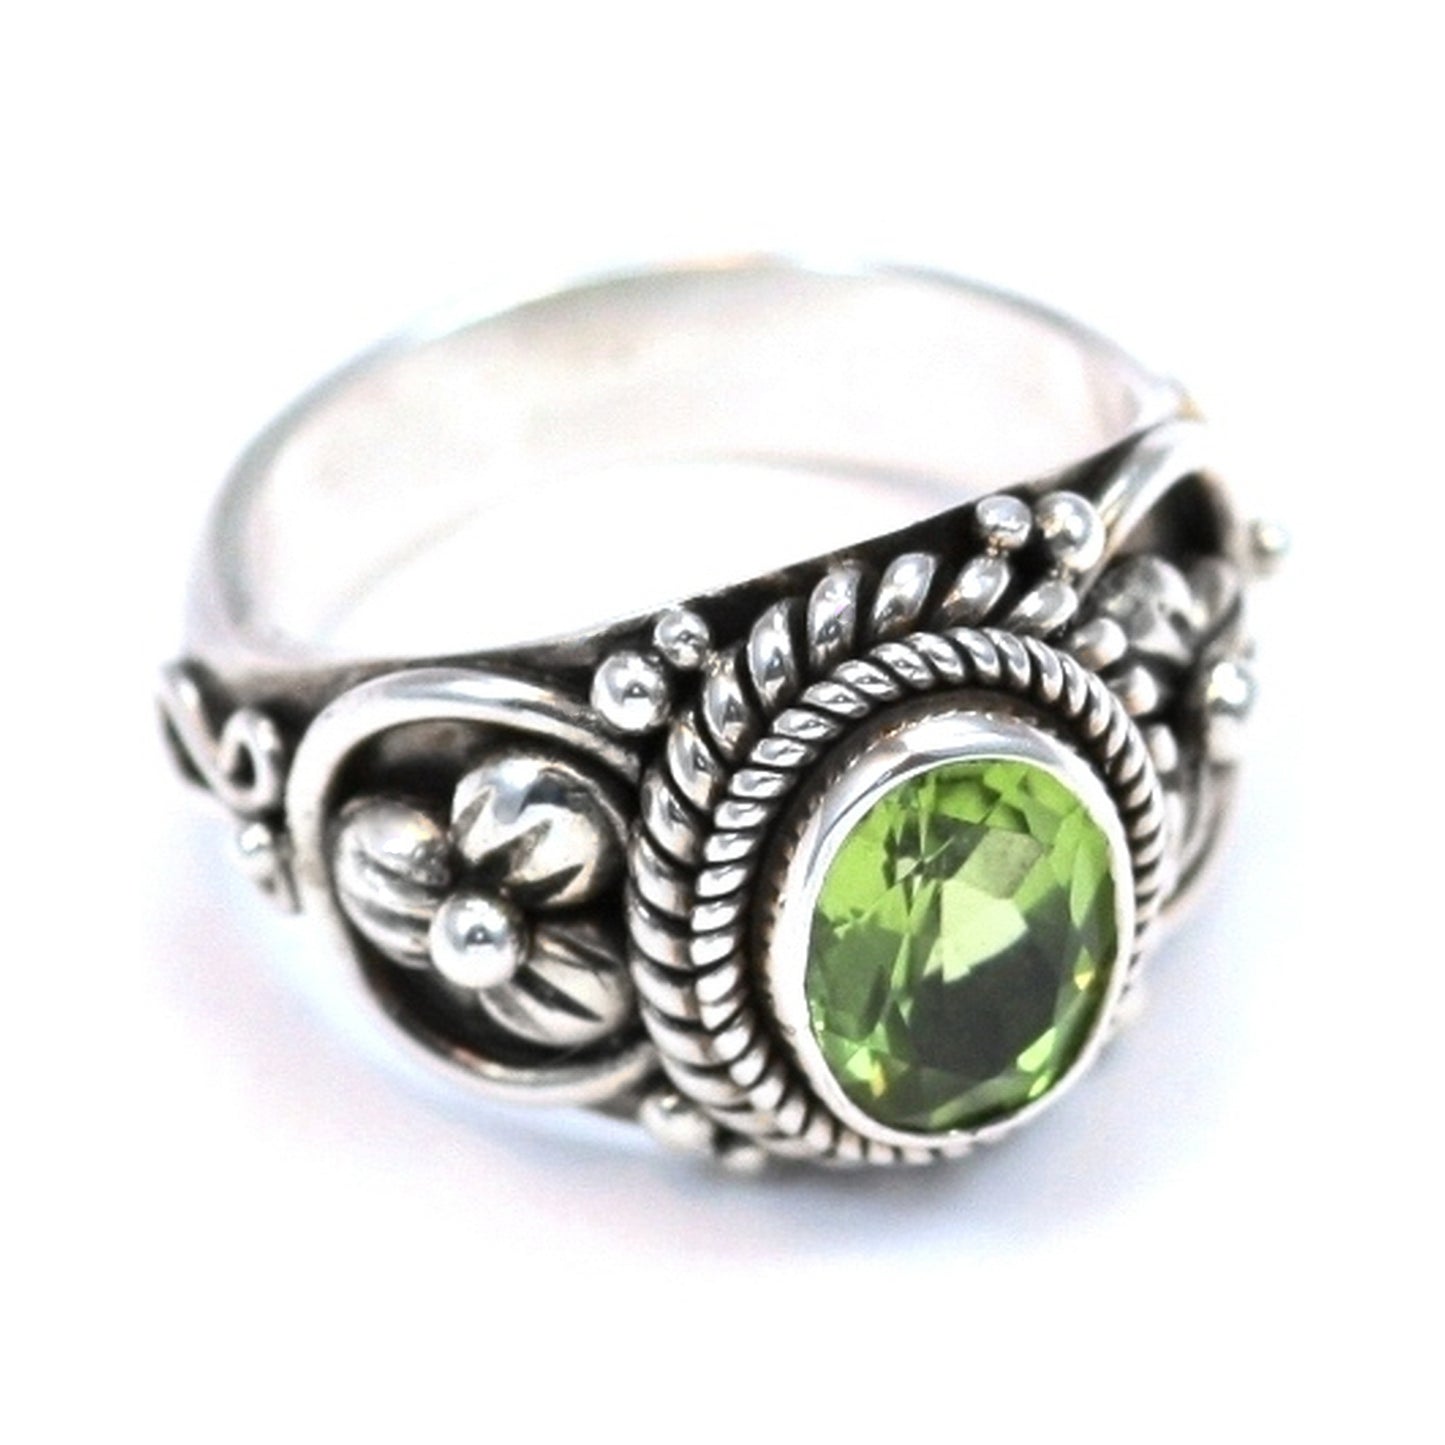 Silver ring with oval peridot gemstone and floral design.